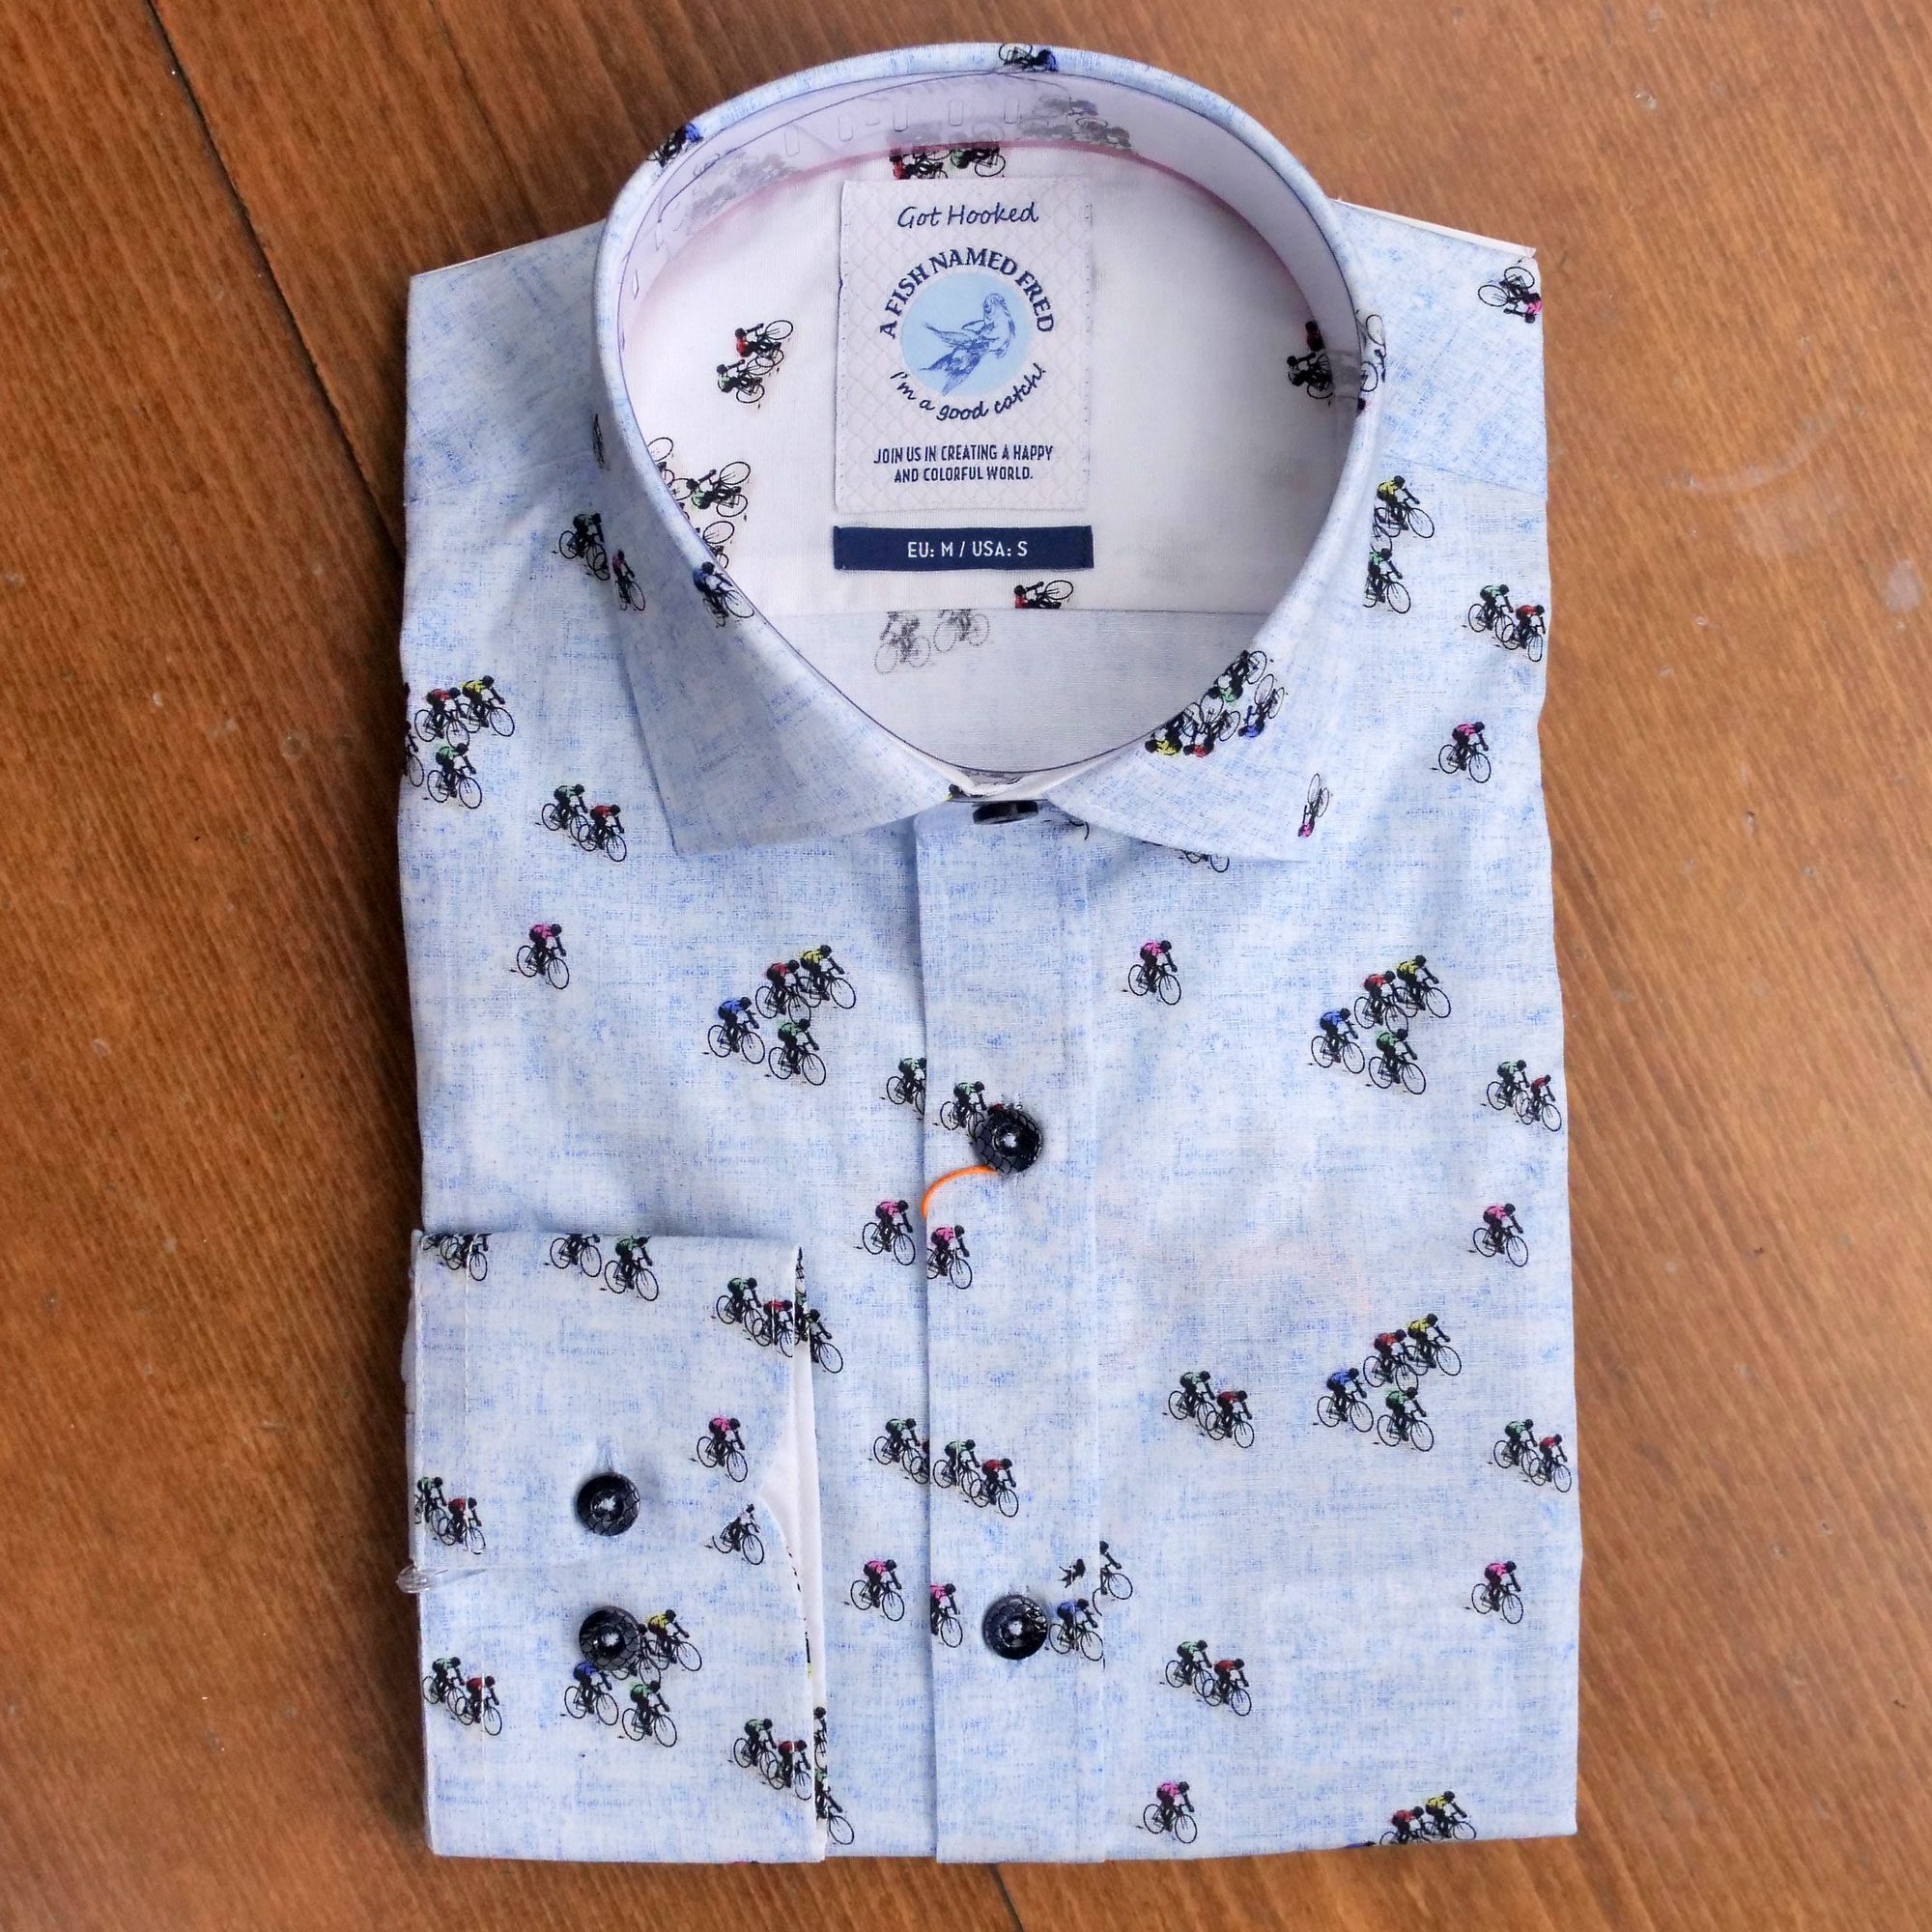 Gabucci take on a cycling shirt, beautiful fabric with lots of tiny cyclists depicted, to describe a busy weekend of events in Bath